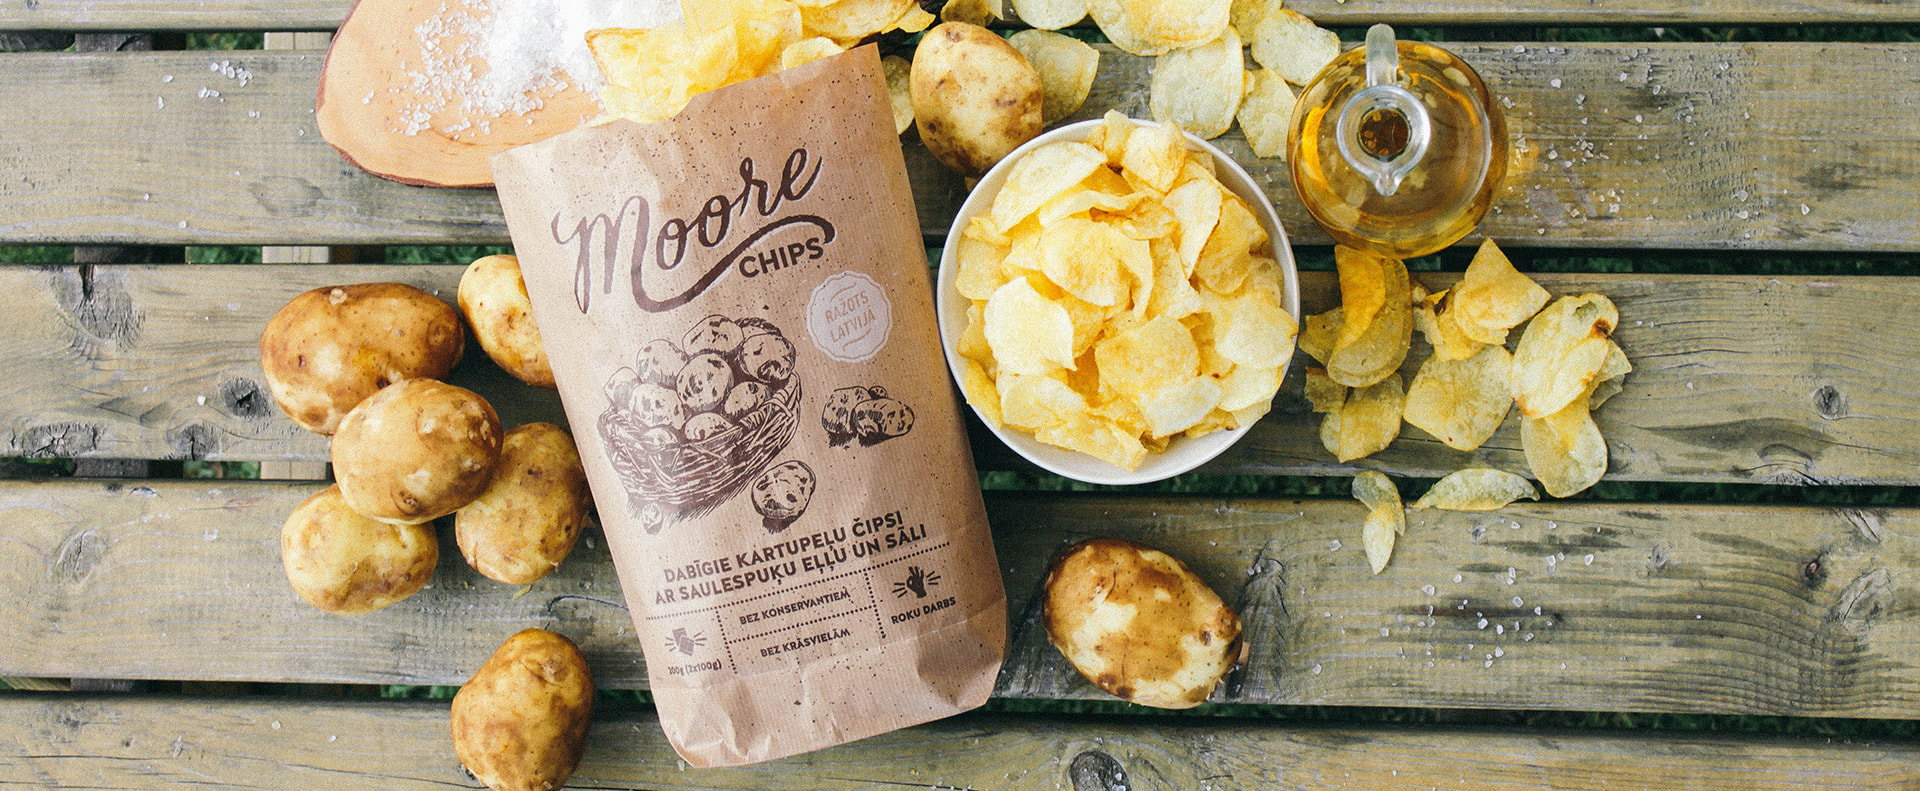 Moore Chips Review